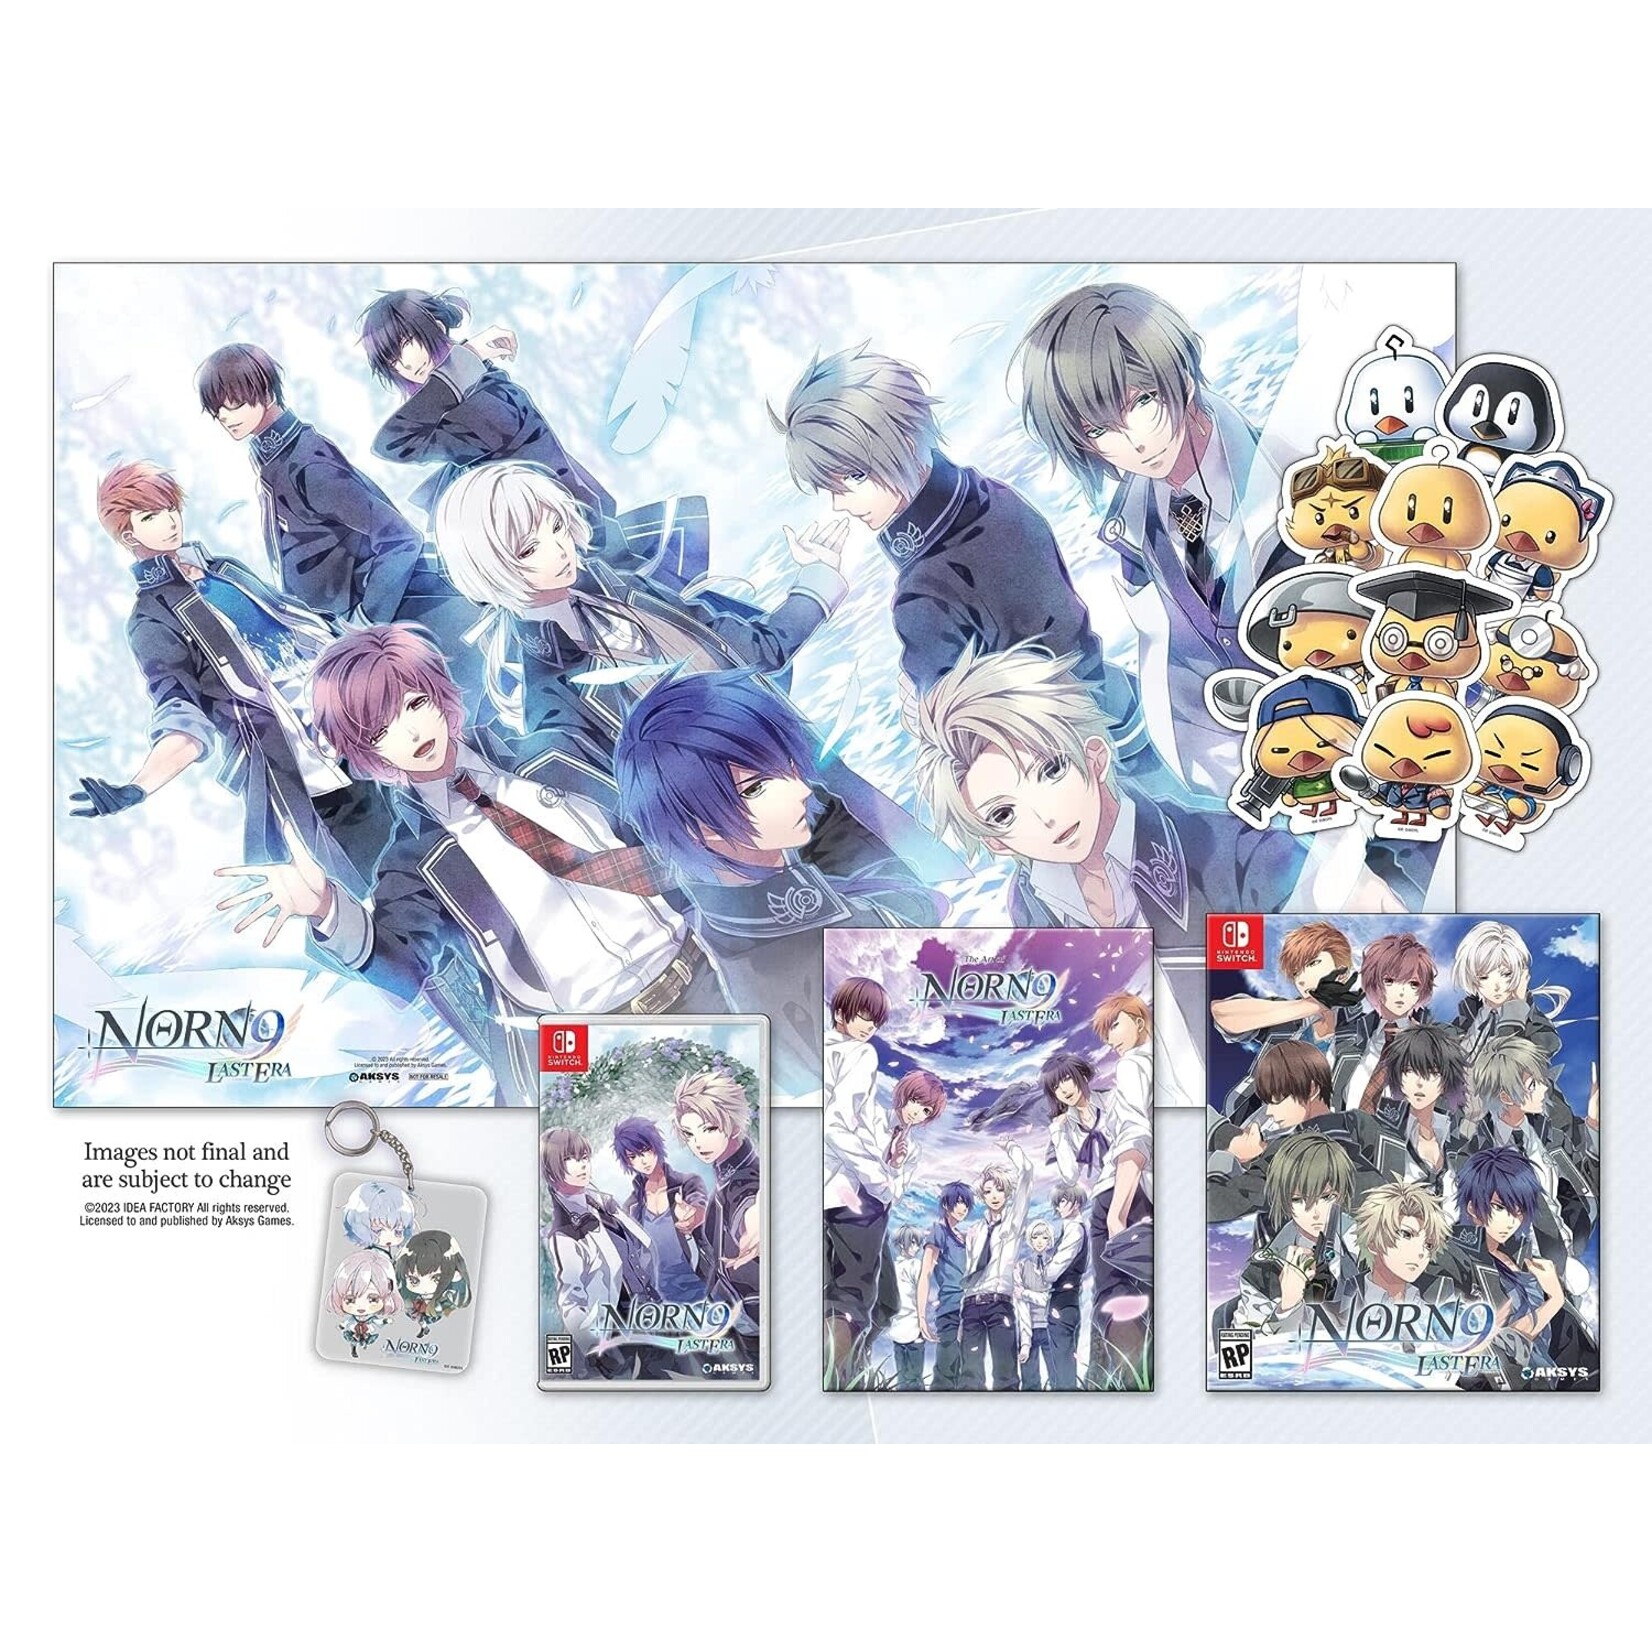 SWITCH-Norn9: Last Era (Limited Edition)